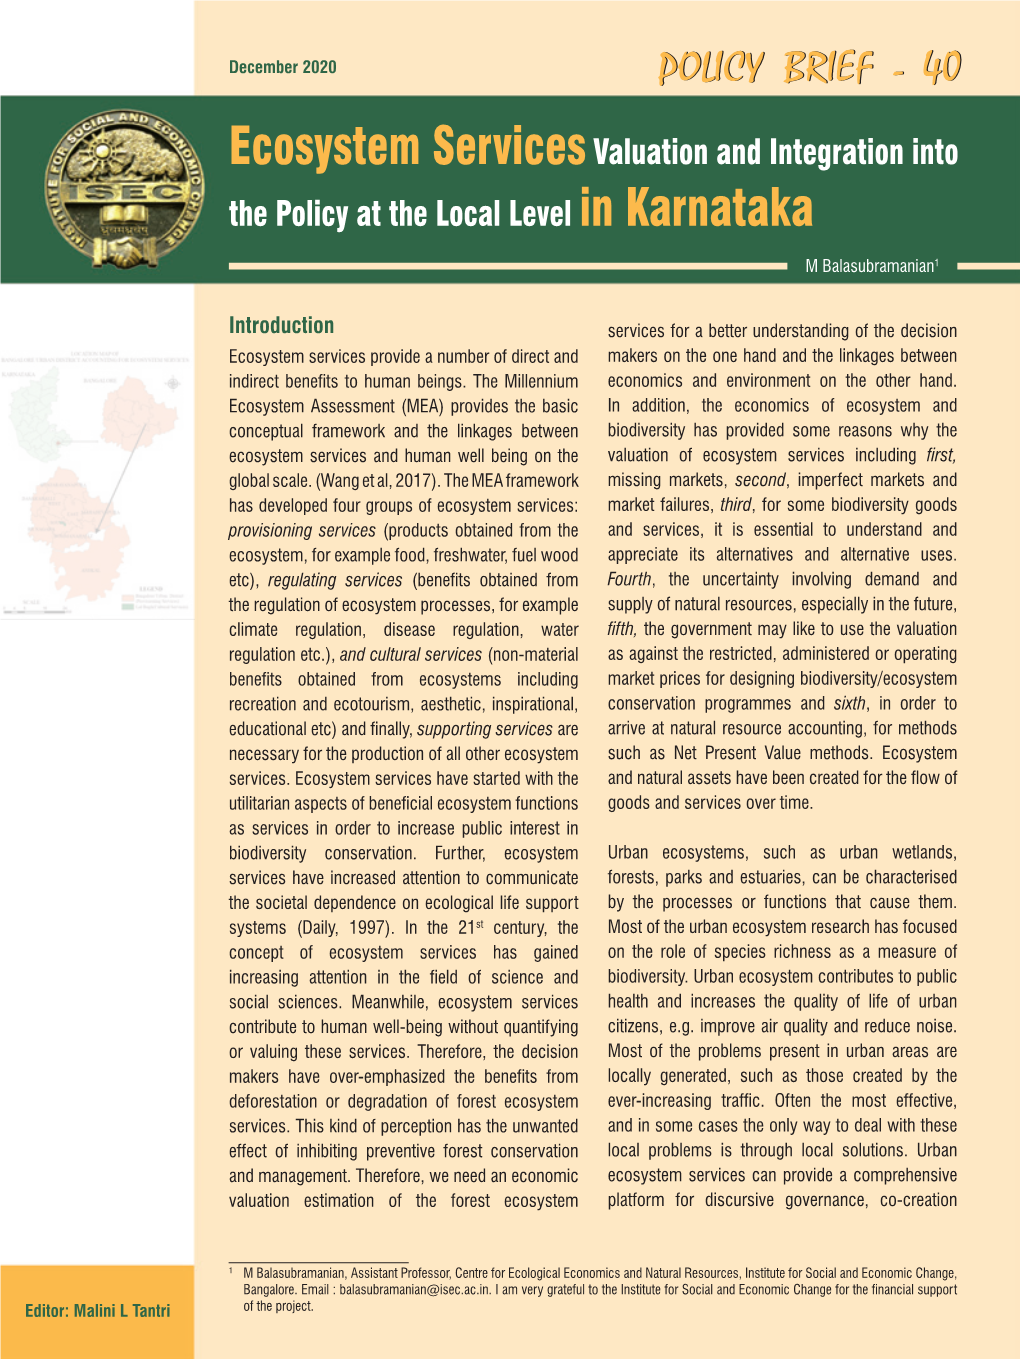 Ecosystem Services Valuation and Integration Into the Policy at the Local Level in Karnataka